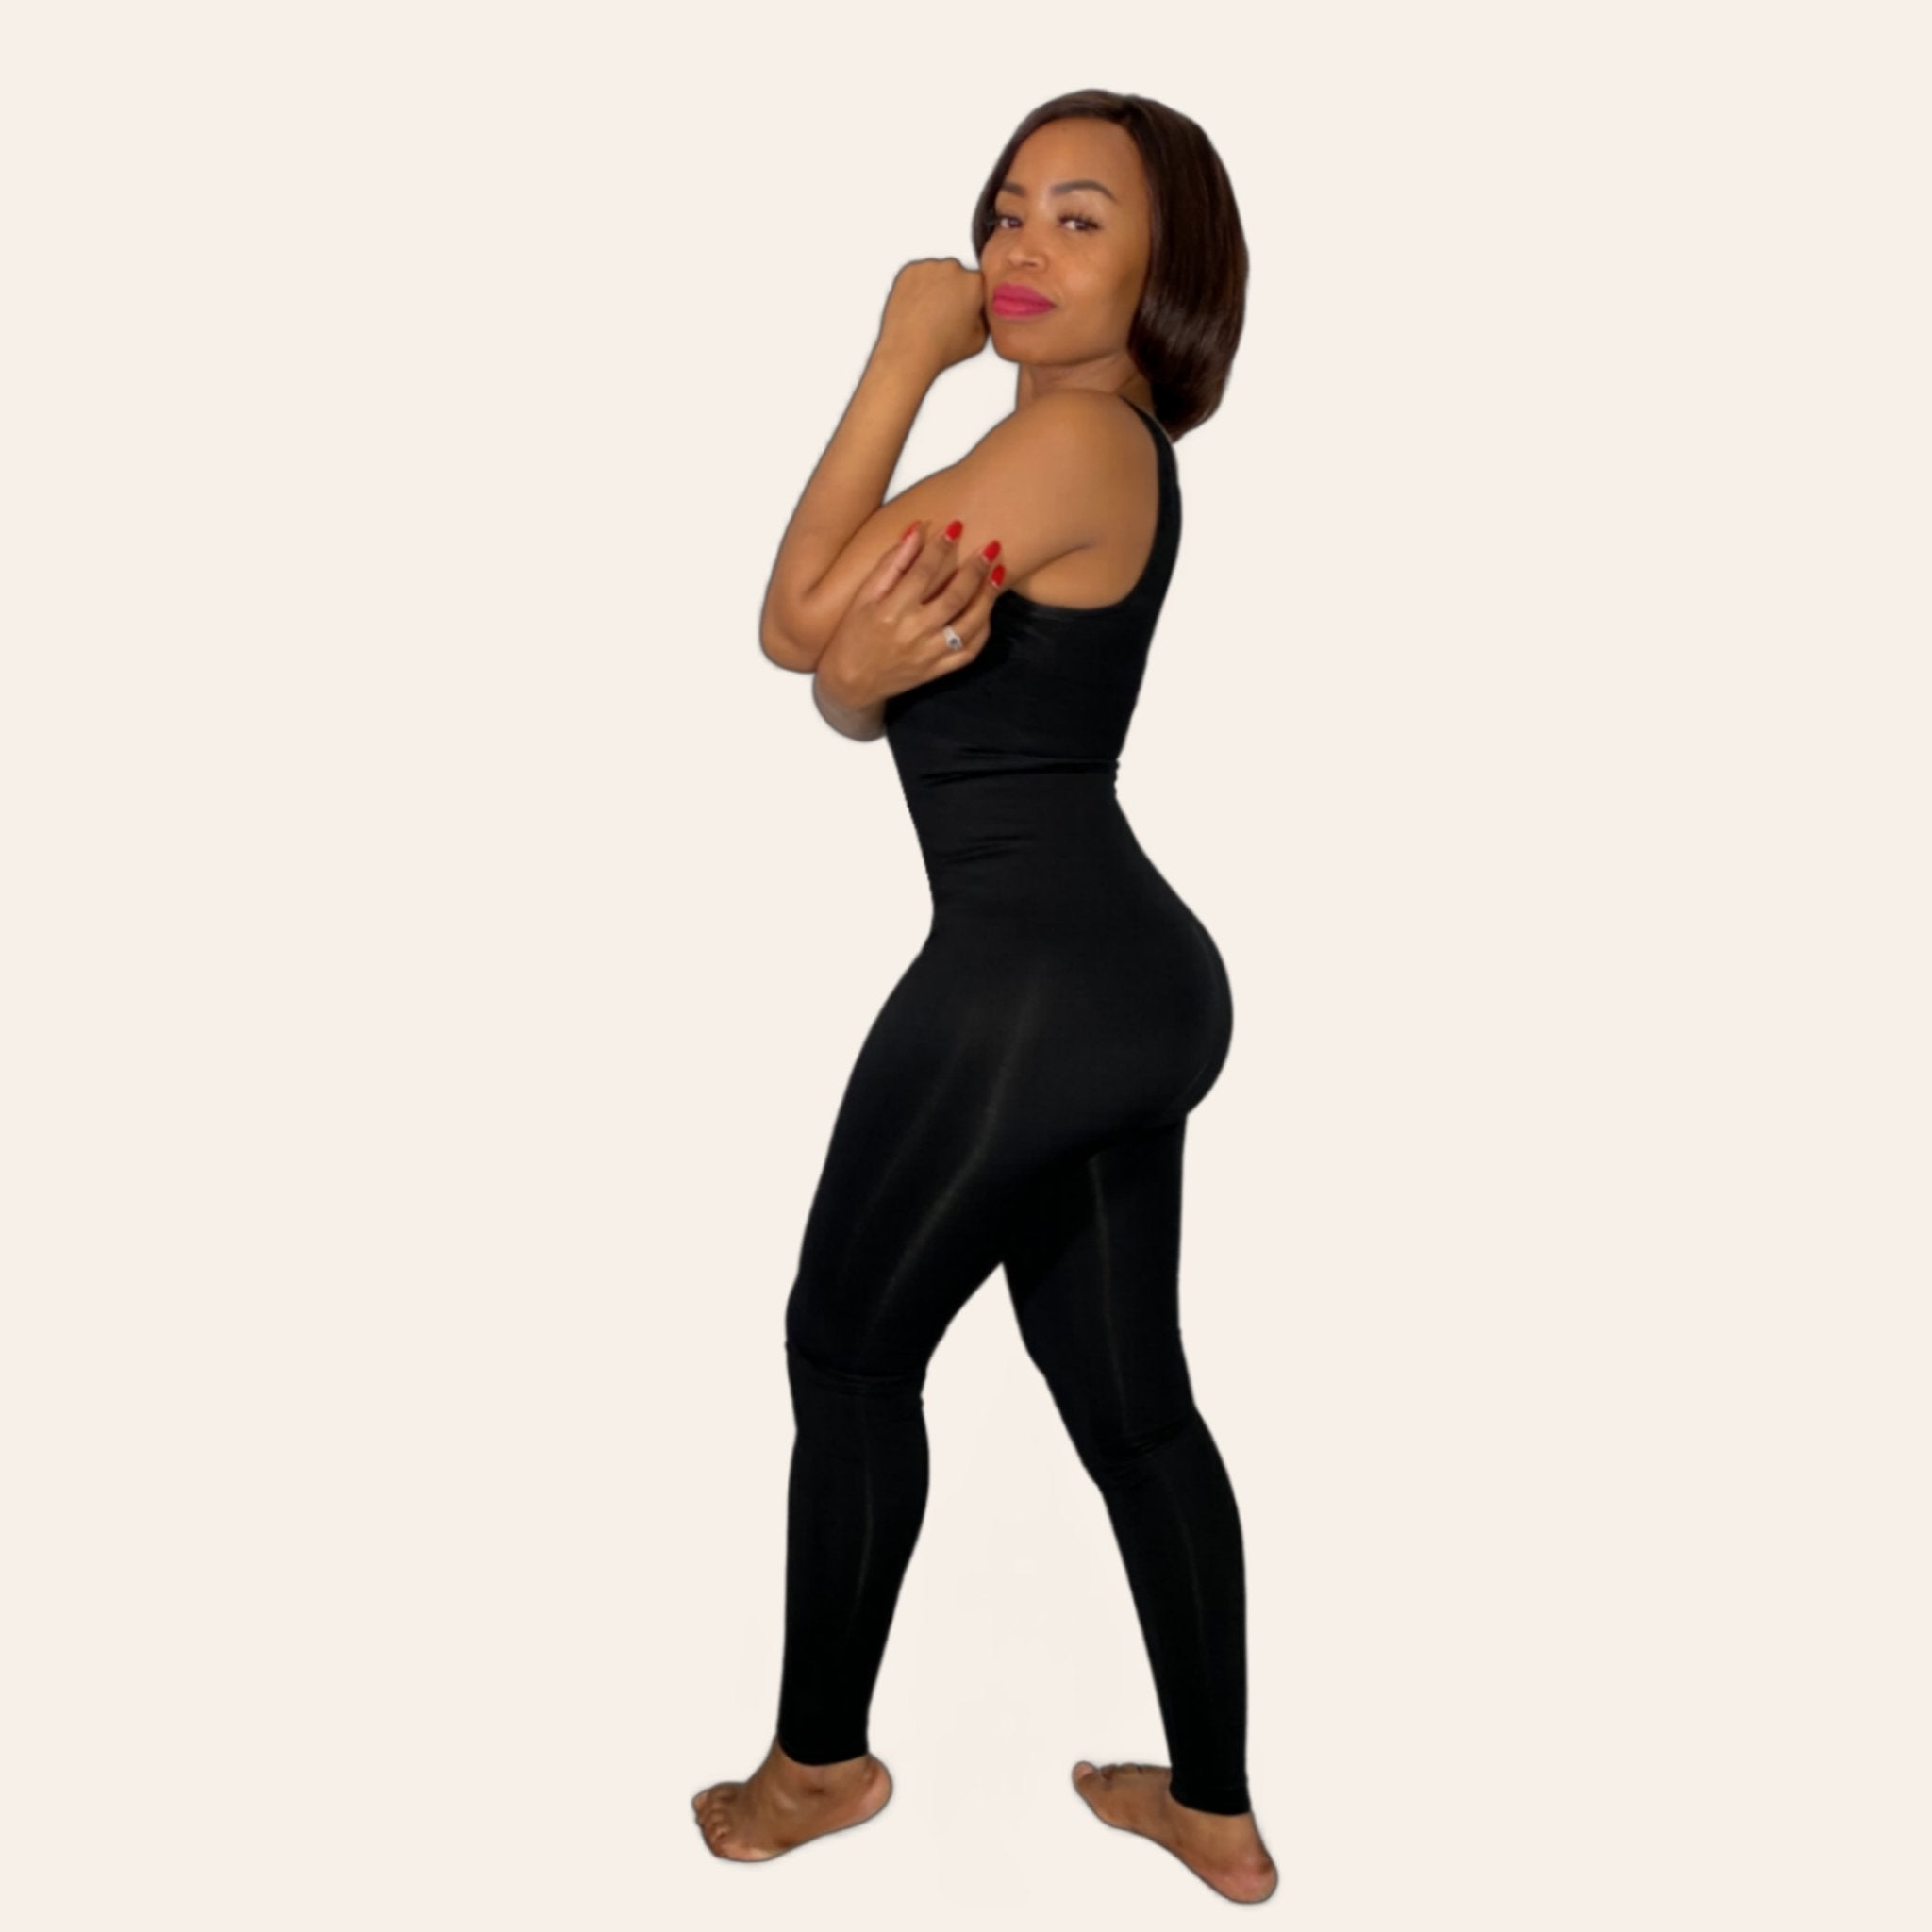 Trying on the viral shaping leggings #angelcurves #shapewear #snatched